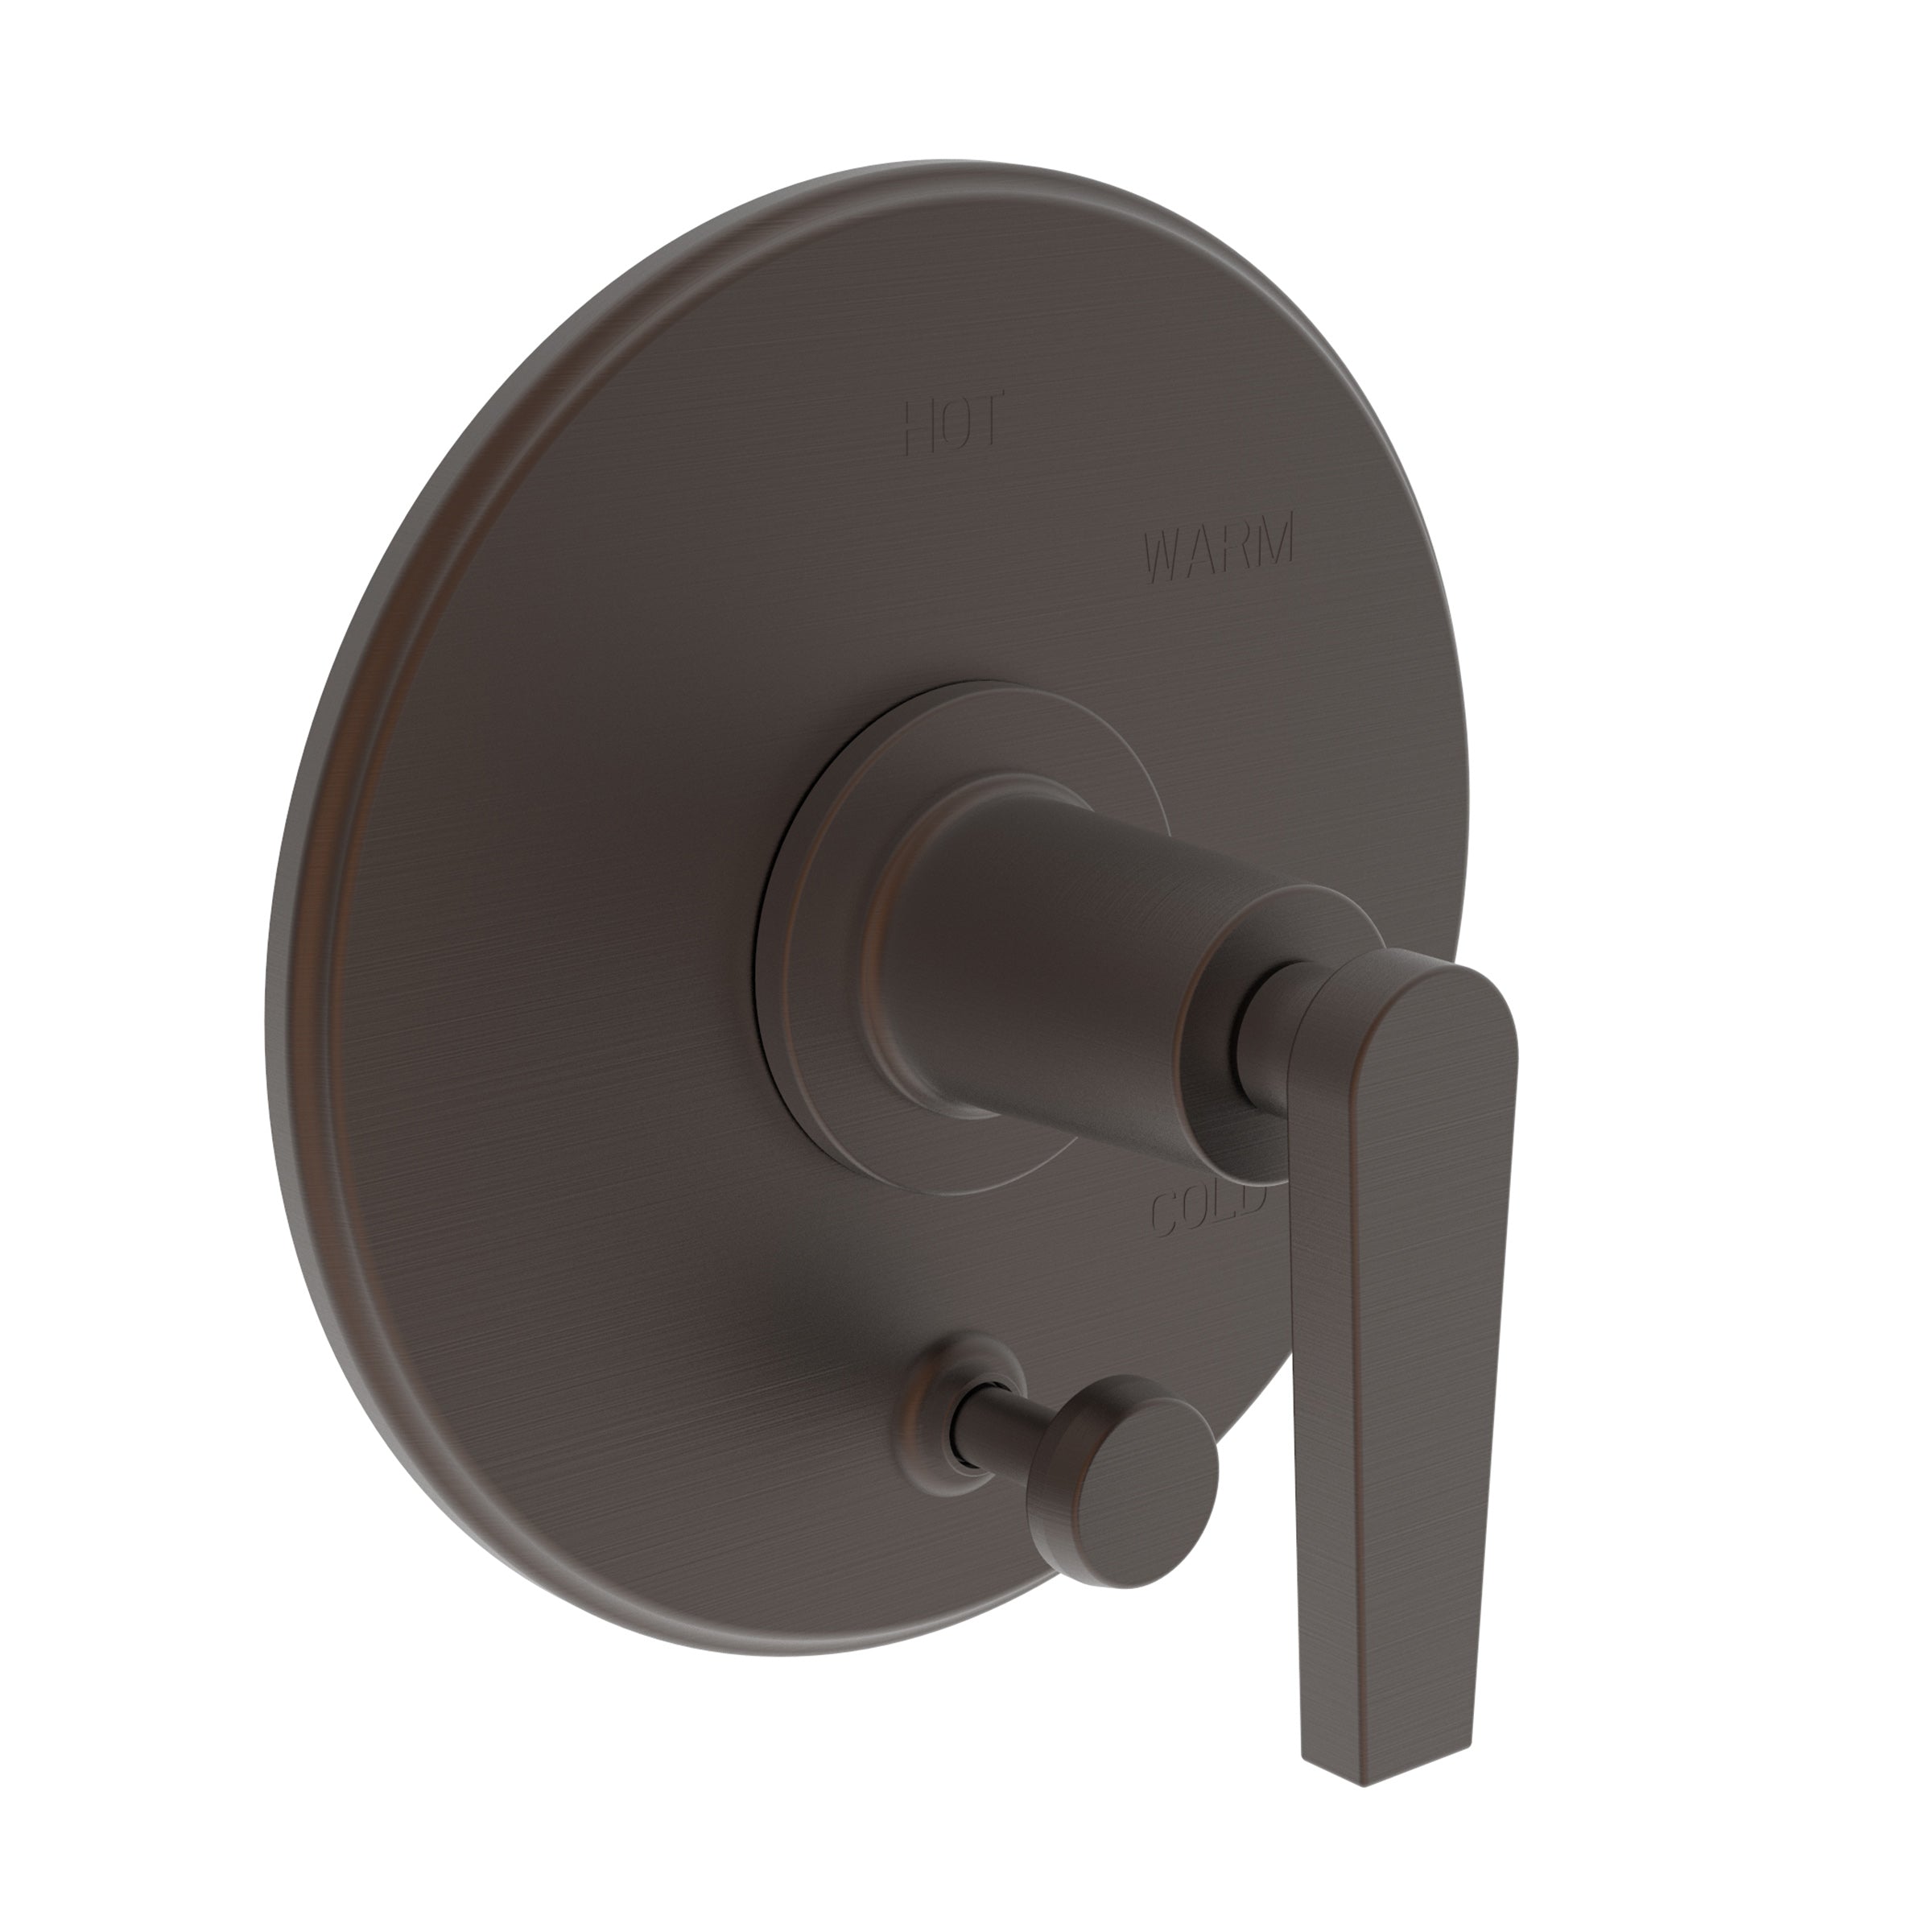 Newport Brass Dorrance Balanced Pressure Tub & Shower Diverter Plate with Handle. Less Showerhead, arm and flange.